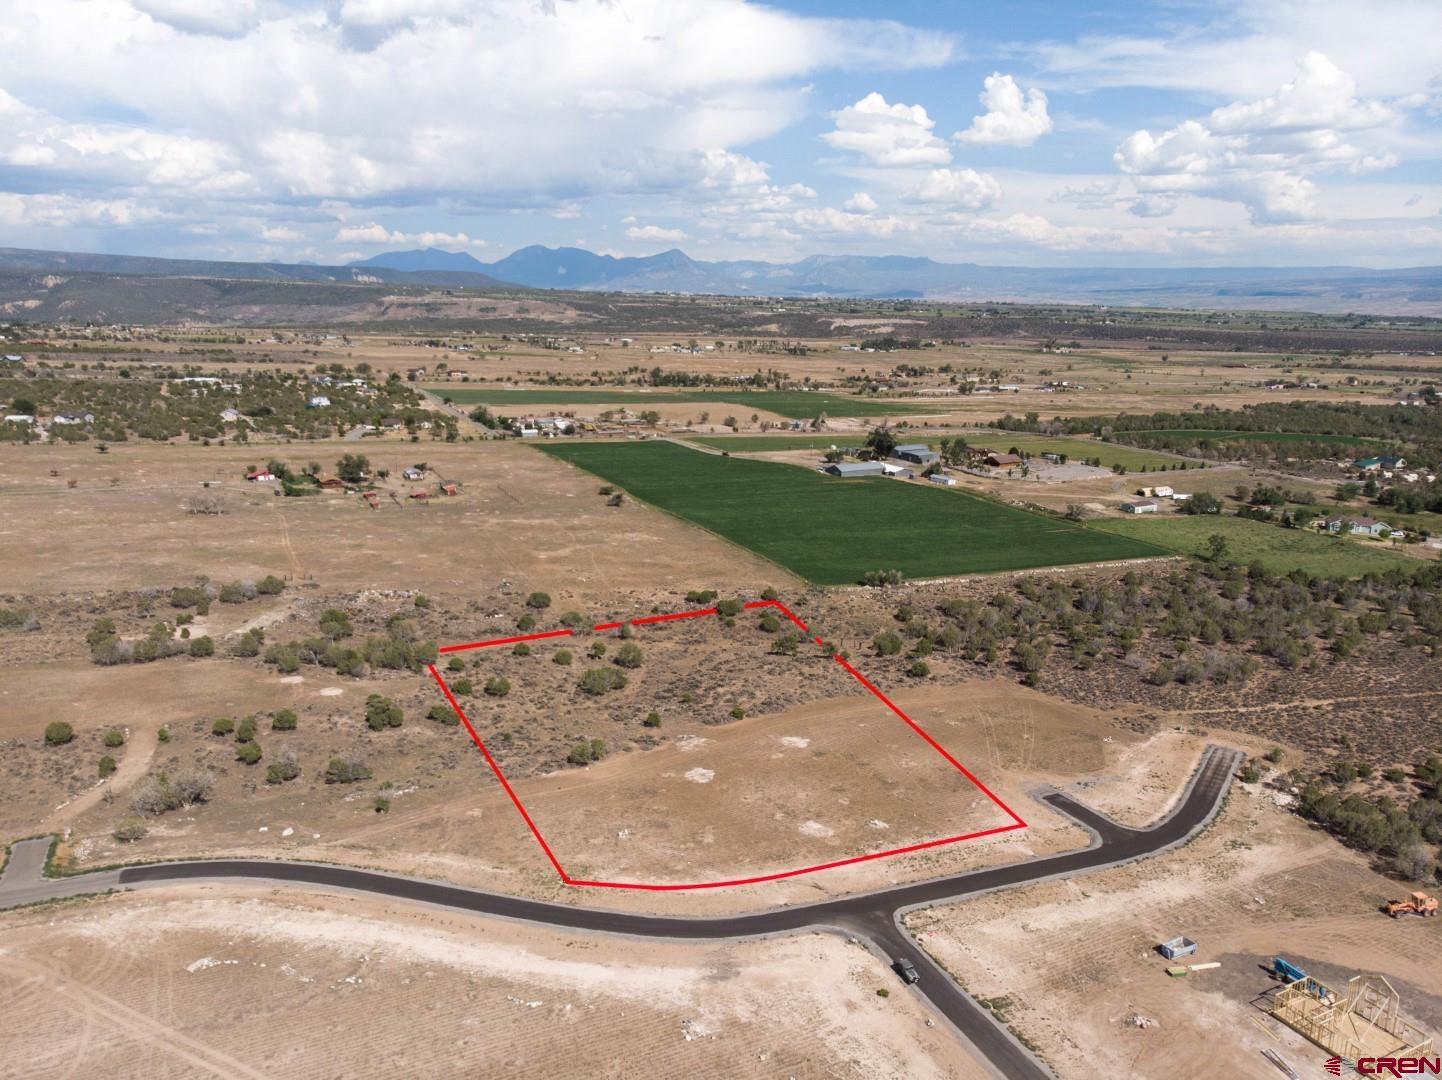 LIVE WESTERN COLORADO! Beautiful location, only 2.5 miles to the town of Cedaredge with views of the Grand Mesa, San Juans, and the Uncompahgre Plateau. This 3.11-acre lot is ready to build your home, DMEA electric on the corner of lot with Elevate internet, water tap is installed and paid for, new soils test for the property included. There is also a single-story floorplan, with elevations for a home designed for this lot. The subdivision has a common open-space area for walks through the pines, overlooking incredible views. Grand Mesa National Forest offers endless summer and winter recreational activities including downhill and cross-country skiing, camping, boating, fishing, hiking and much more. For the golfers, Deer Creek Village Golf Course, is located in Cedaredge and Devils Thumb Golf Course in Delta.